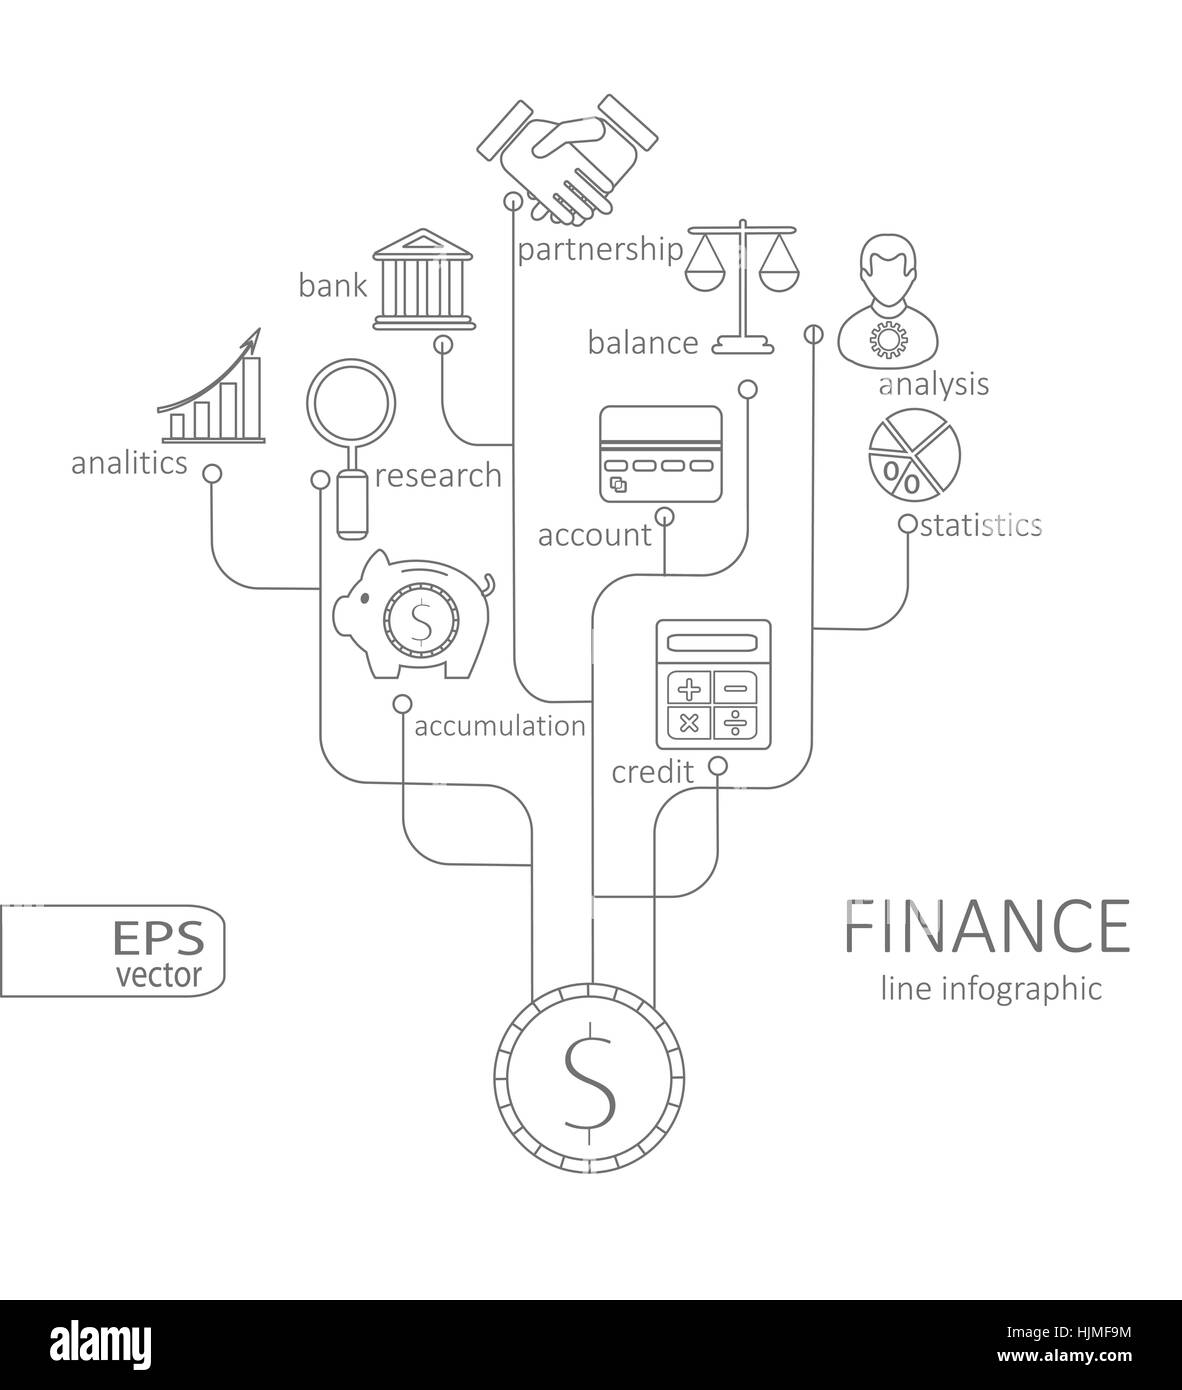 Banking and savings -finance infographic vector illustration Stock Vector